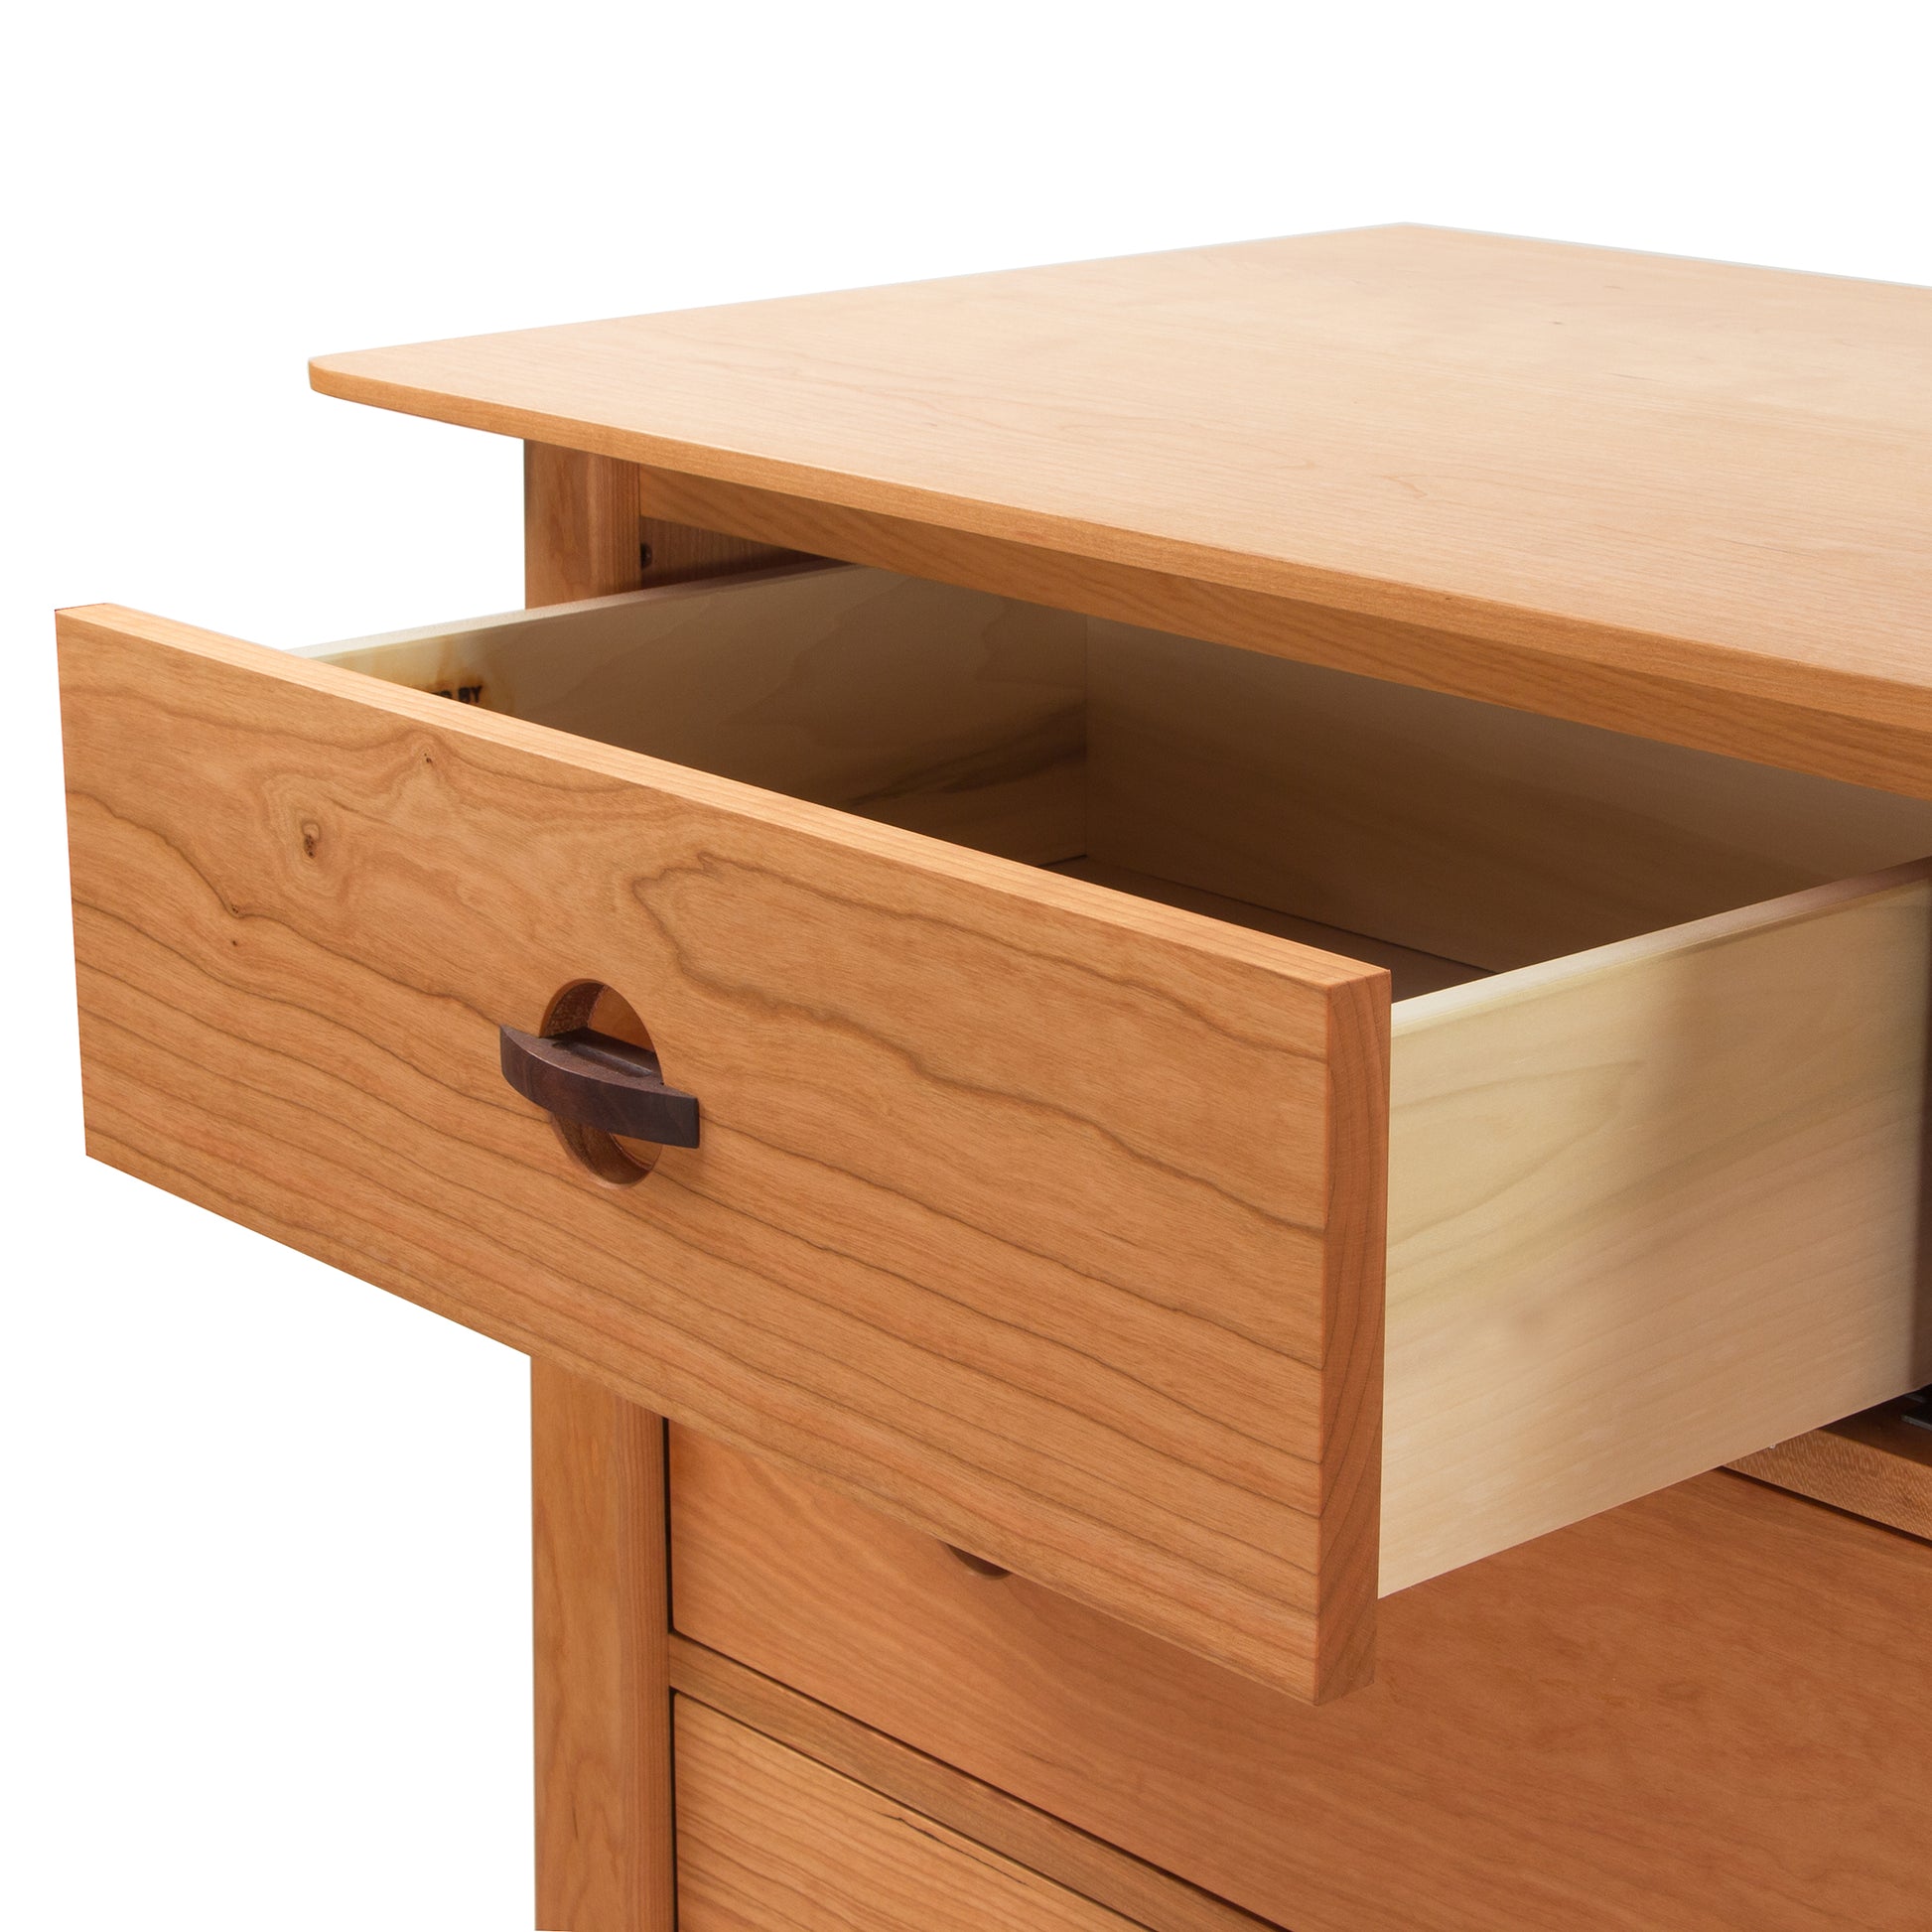 A close-up of an open drawer in a Cherry Moon 7-Drawer Dresser by Maple Corner Woodworks, showing fine wood grain and a simple wooden handle. The background is plain white, emphasizing the natural color and texture of the sustainably harvested wood.